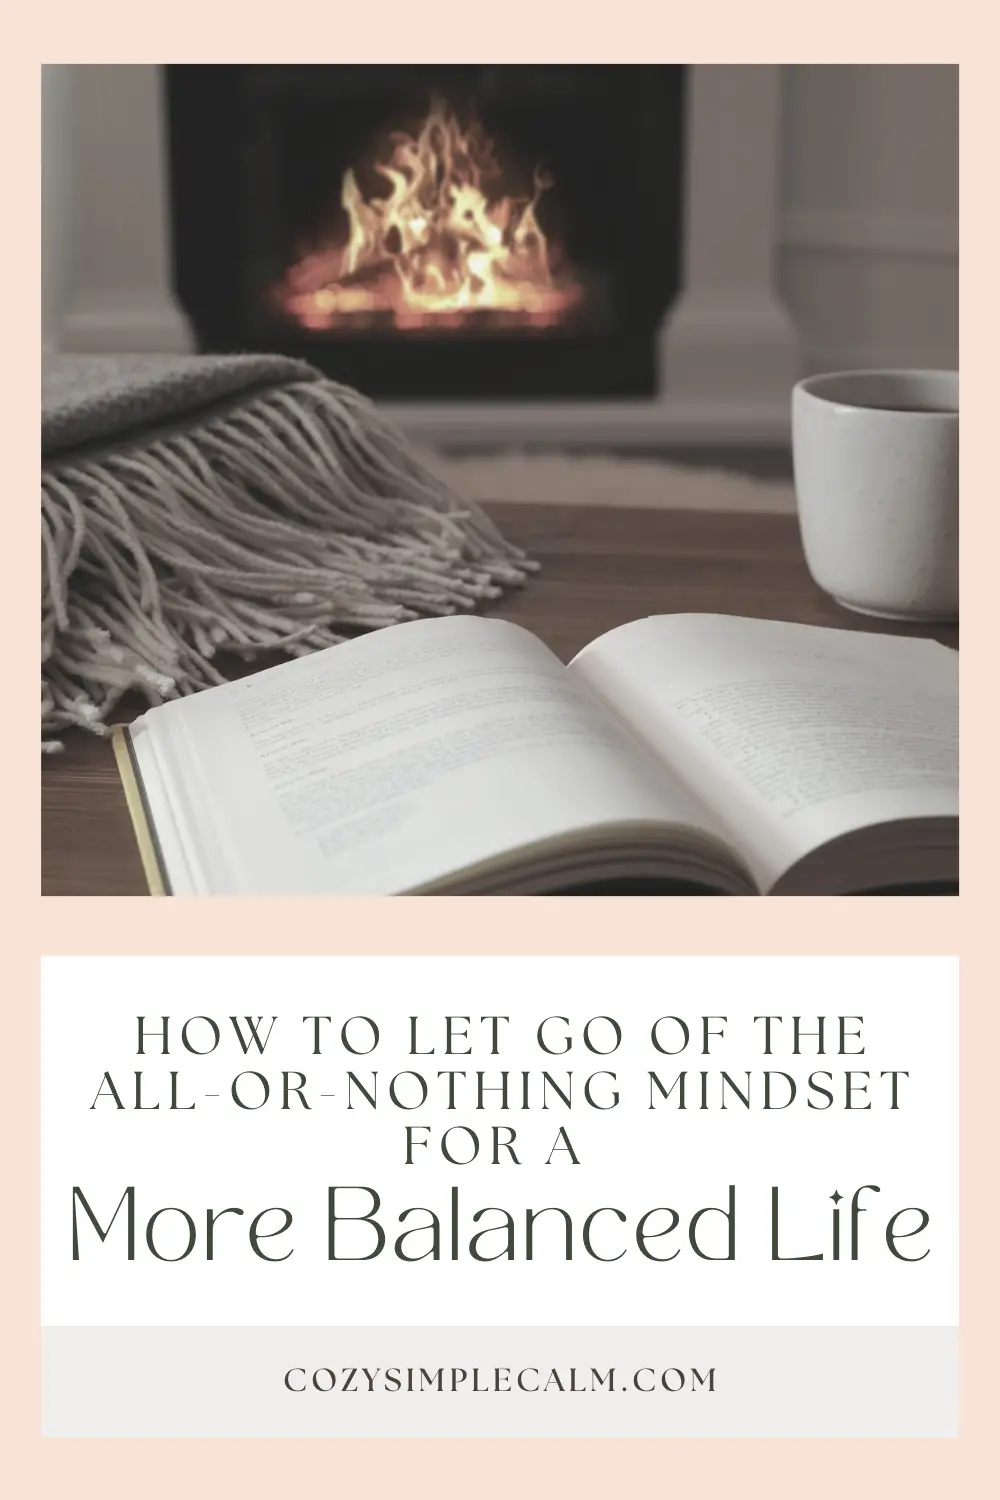 Image of book, blanket, and mug on table in front of fireplace - Text overlay: How to let go of the all-or-nothing-mindset for a more balanced life - cozysimplecalm.com 